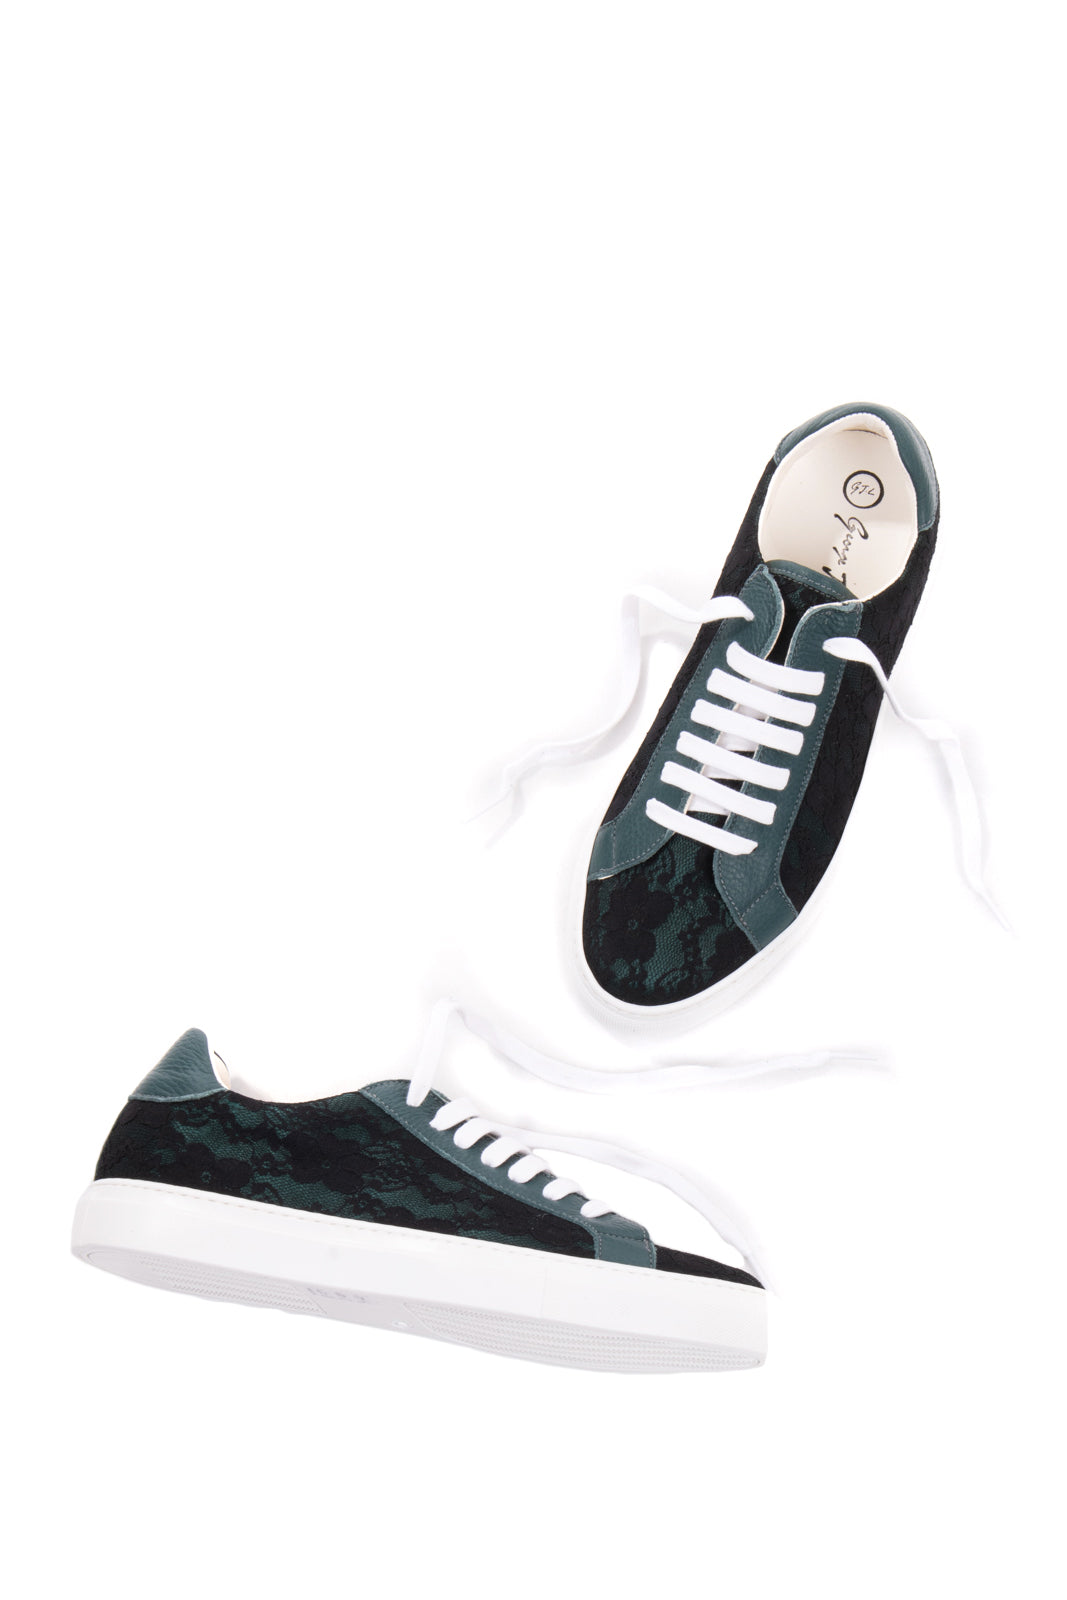 GEORGE J. LOVE Sneakers EU 39 UK 6 US 9 Contrast Leather Lace Trim Made in Italy gallery main photo